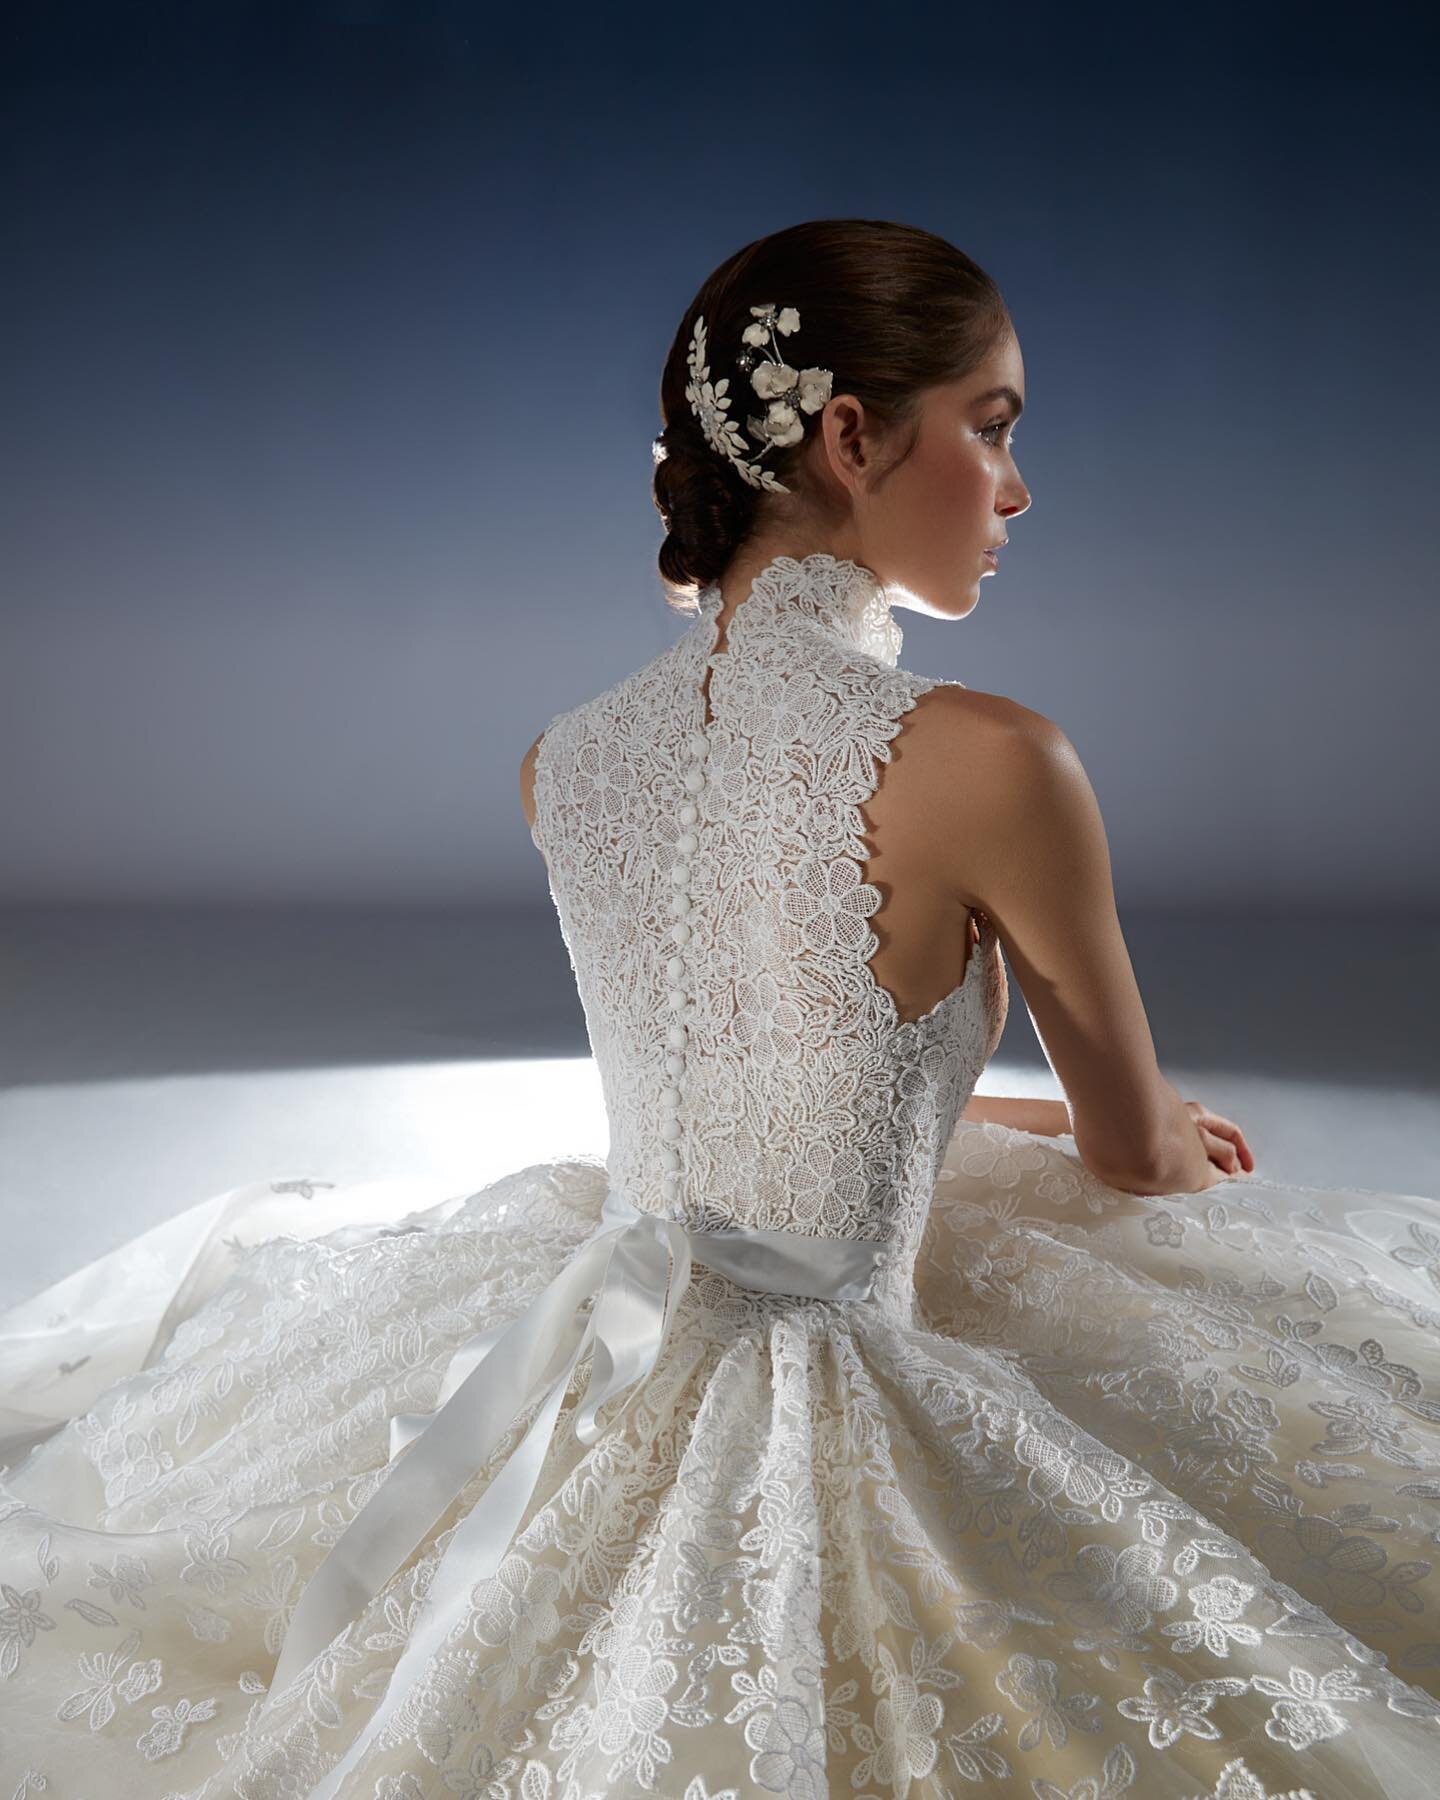 Here for a limited time&hellip;Glass Slipper by @peterlangner has made her way to Gamberdella! Adorned with floral appliqu&eacute; and a chic neckline Glass Slipper is the dress of your dreams.